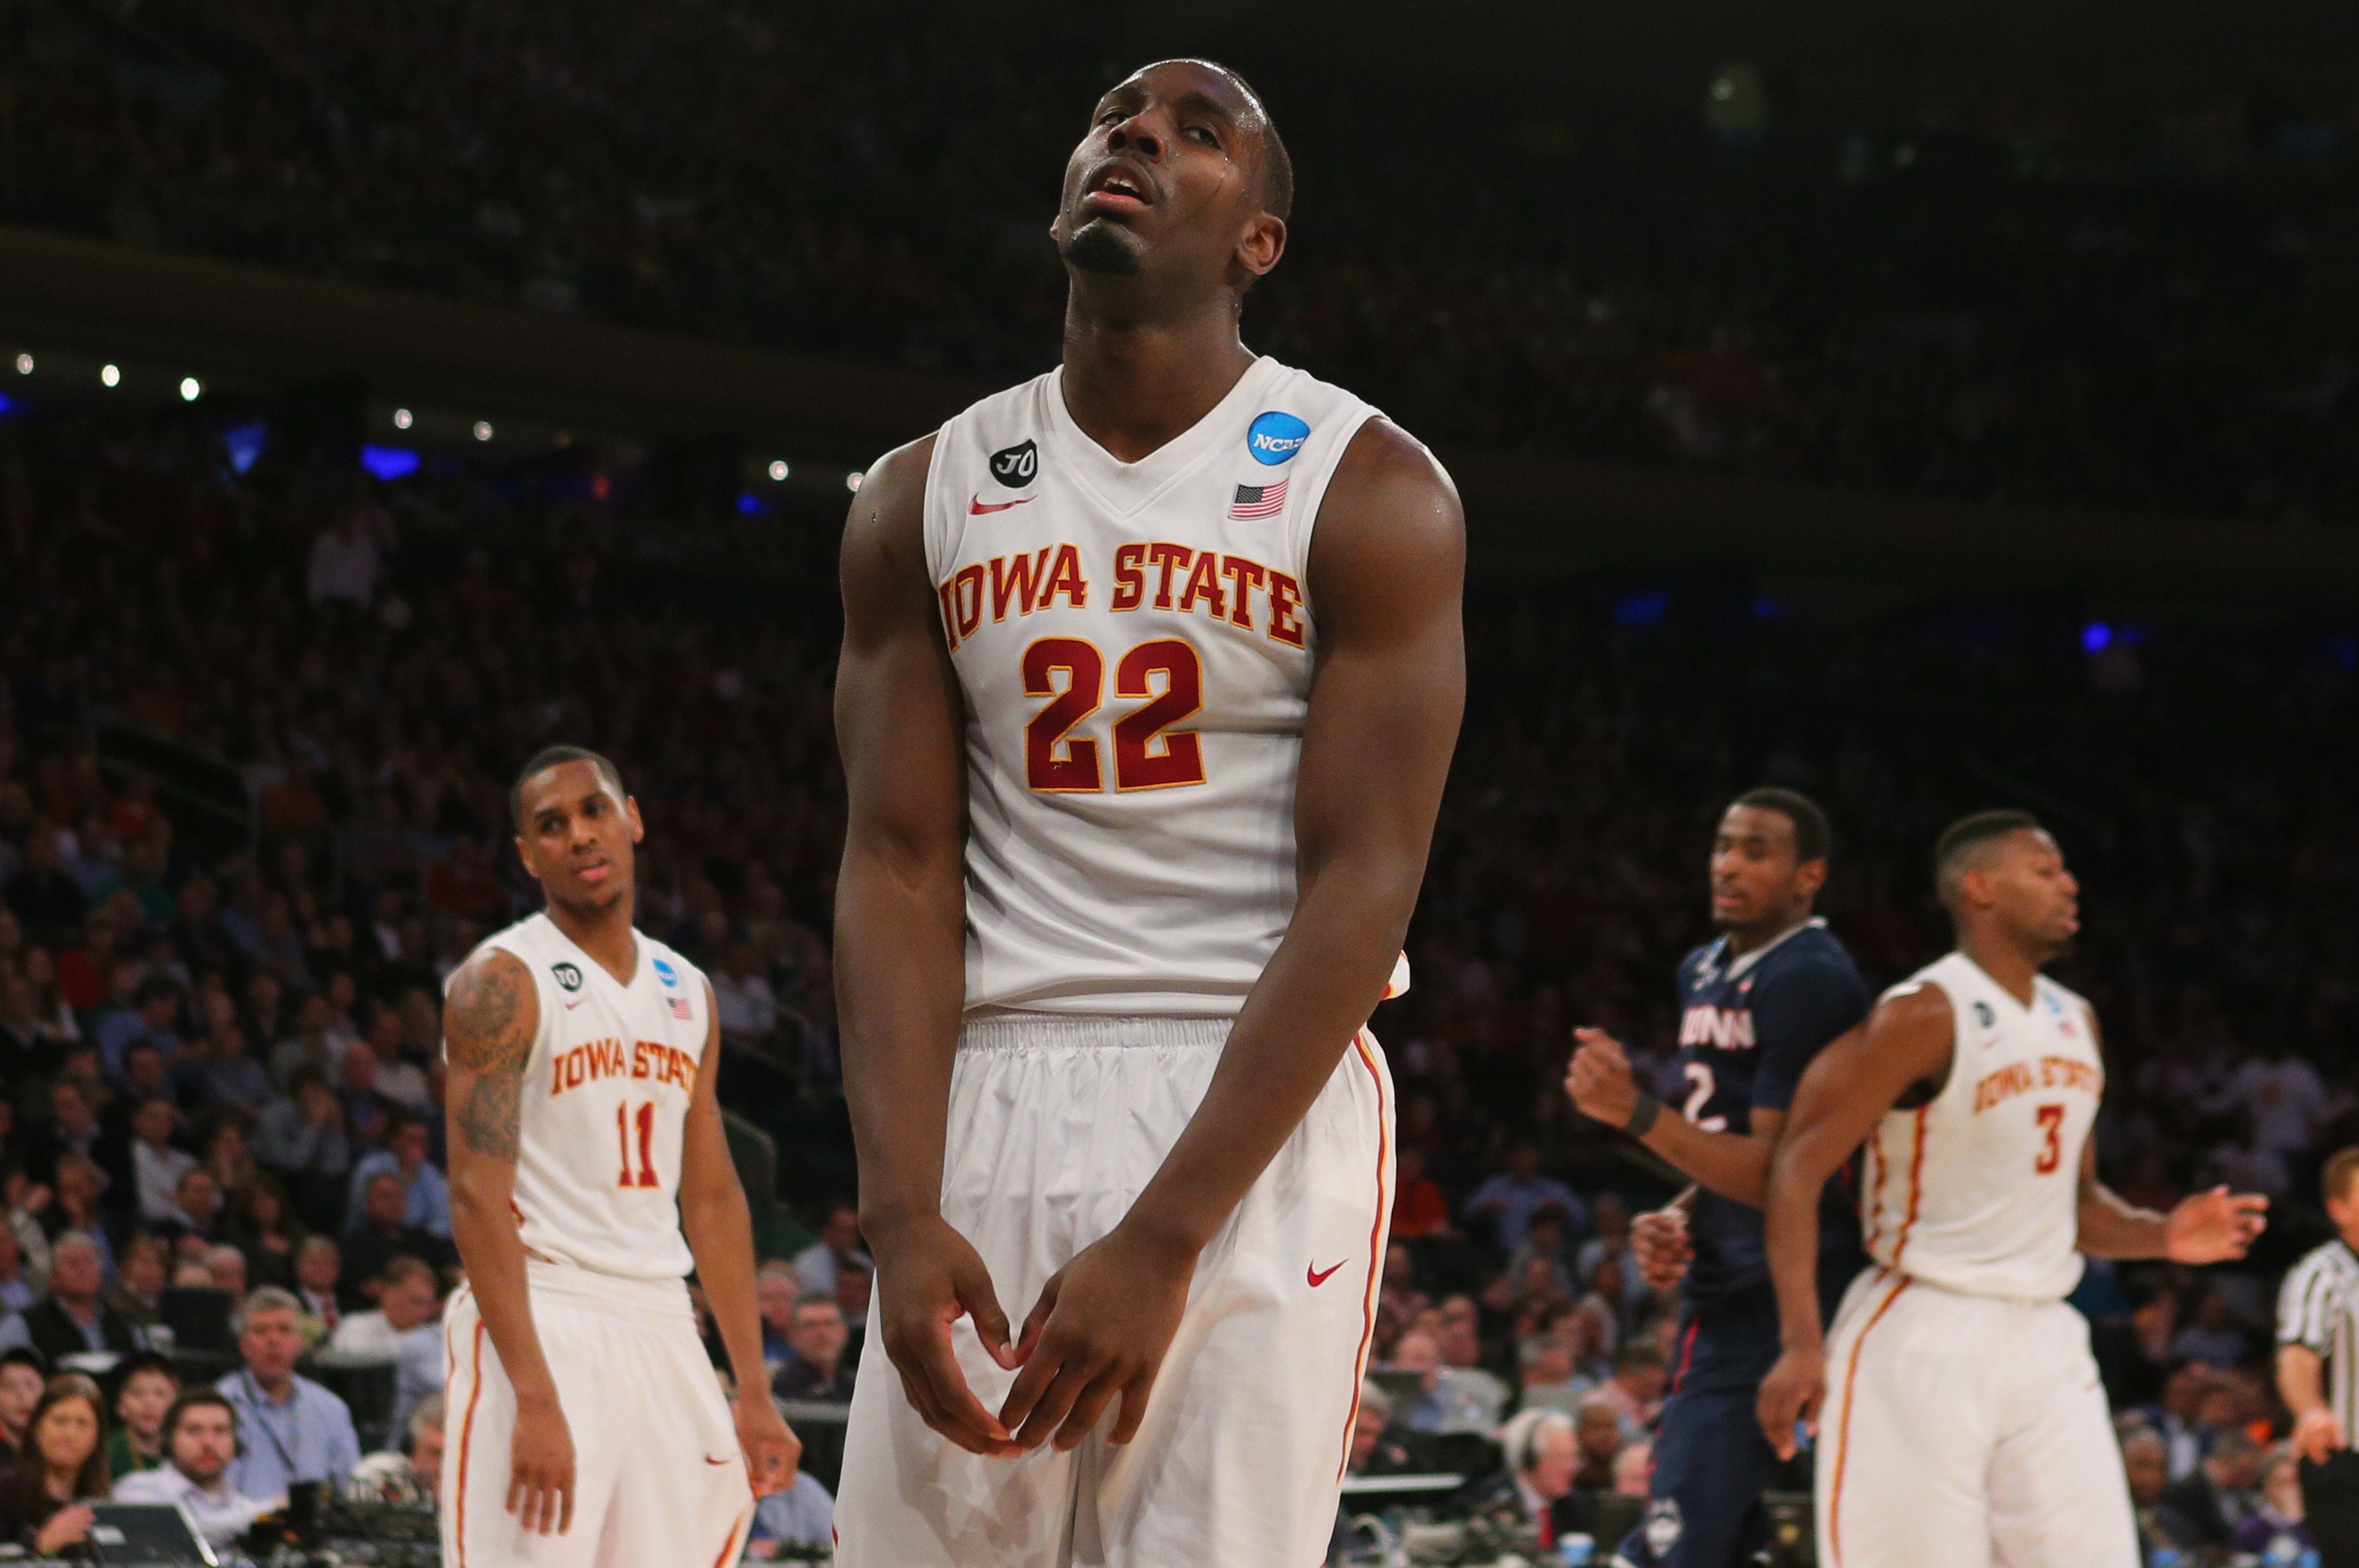 Iowa State Cyclones forward Dustin Hogue sighs after a play during the second half against the Connecticut Huskies in the semifinals of the east regional of the 2014 NCAA Mens Basketball Championship tournament at Madison Square Garden in New York City, March 28, 2014. Connecticut won 81-76.